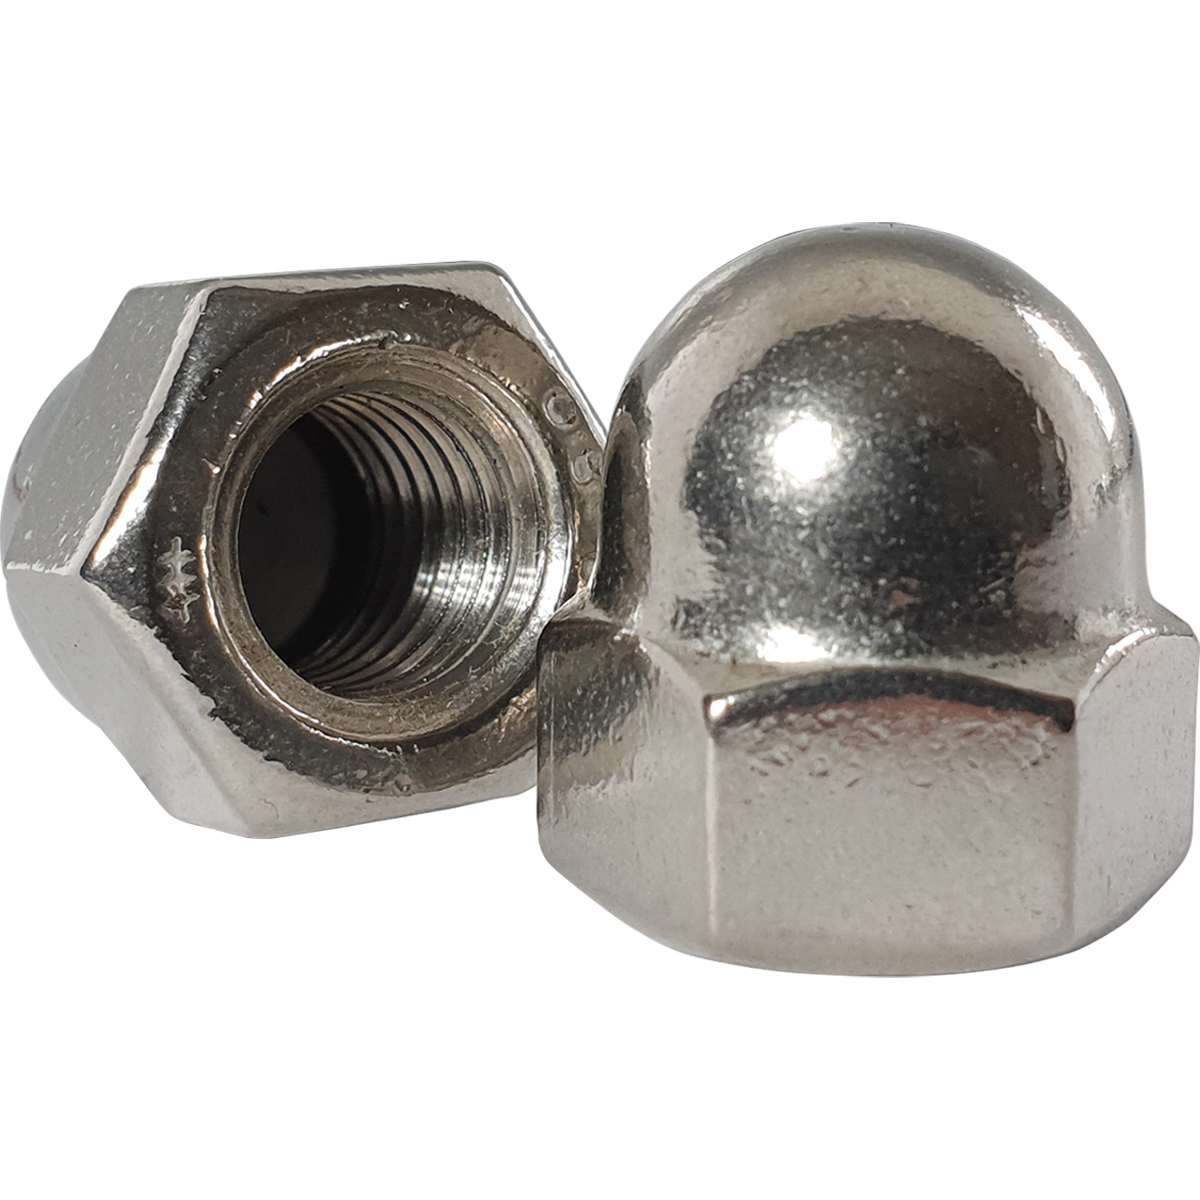 A nut with a rounded dome side for use on threaded ends. Corrosion resistant, UNF, A2 stainless steel dome nuts in various diameters and at competitive prices. 